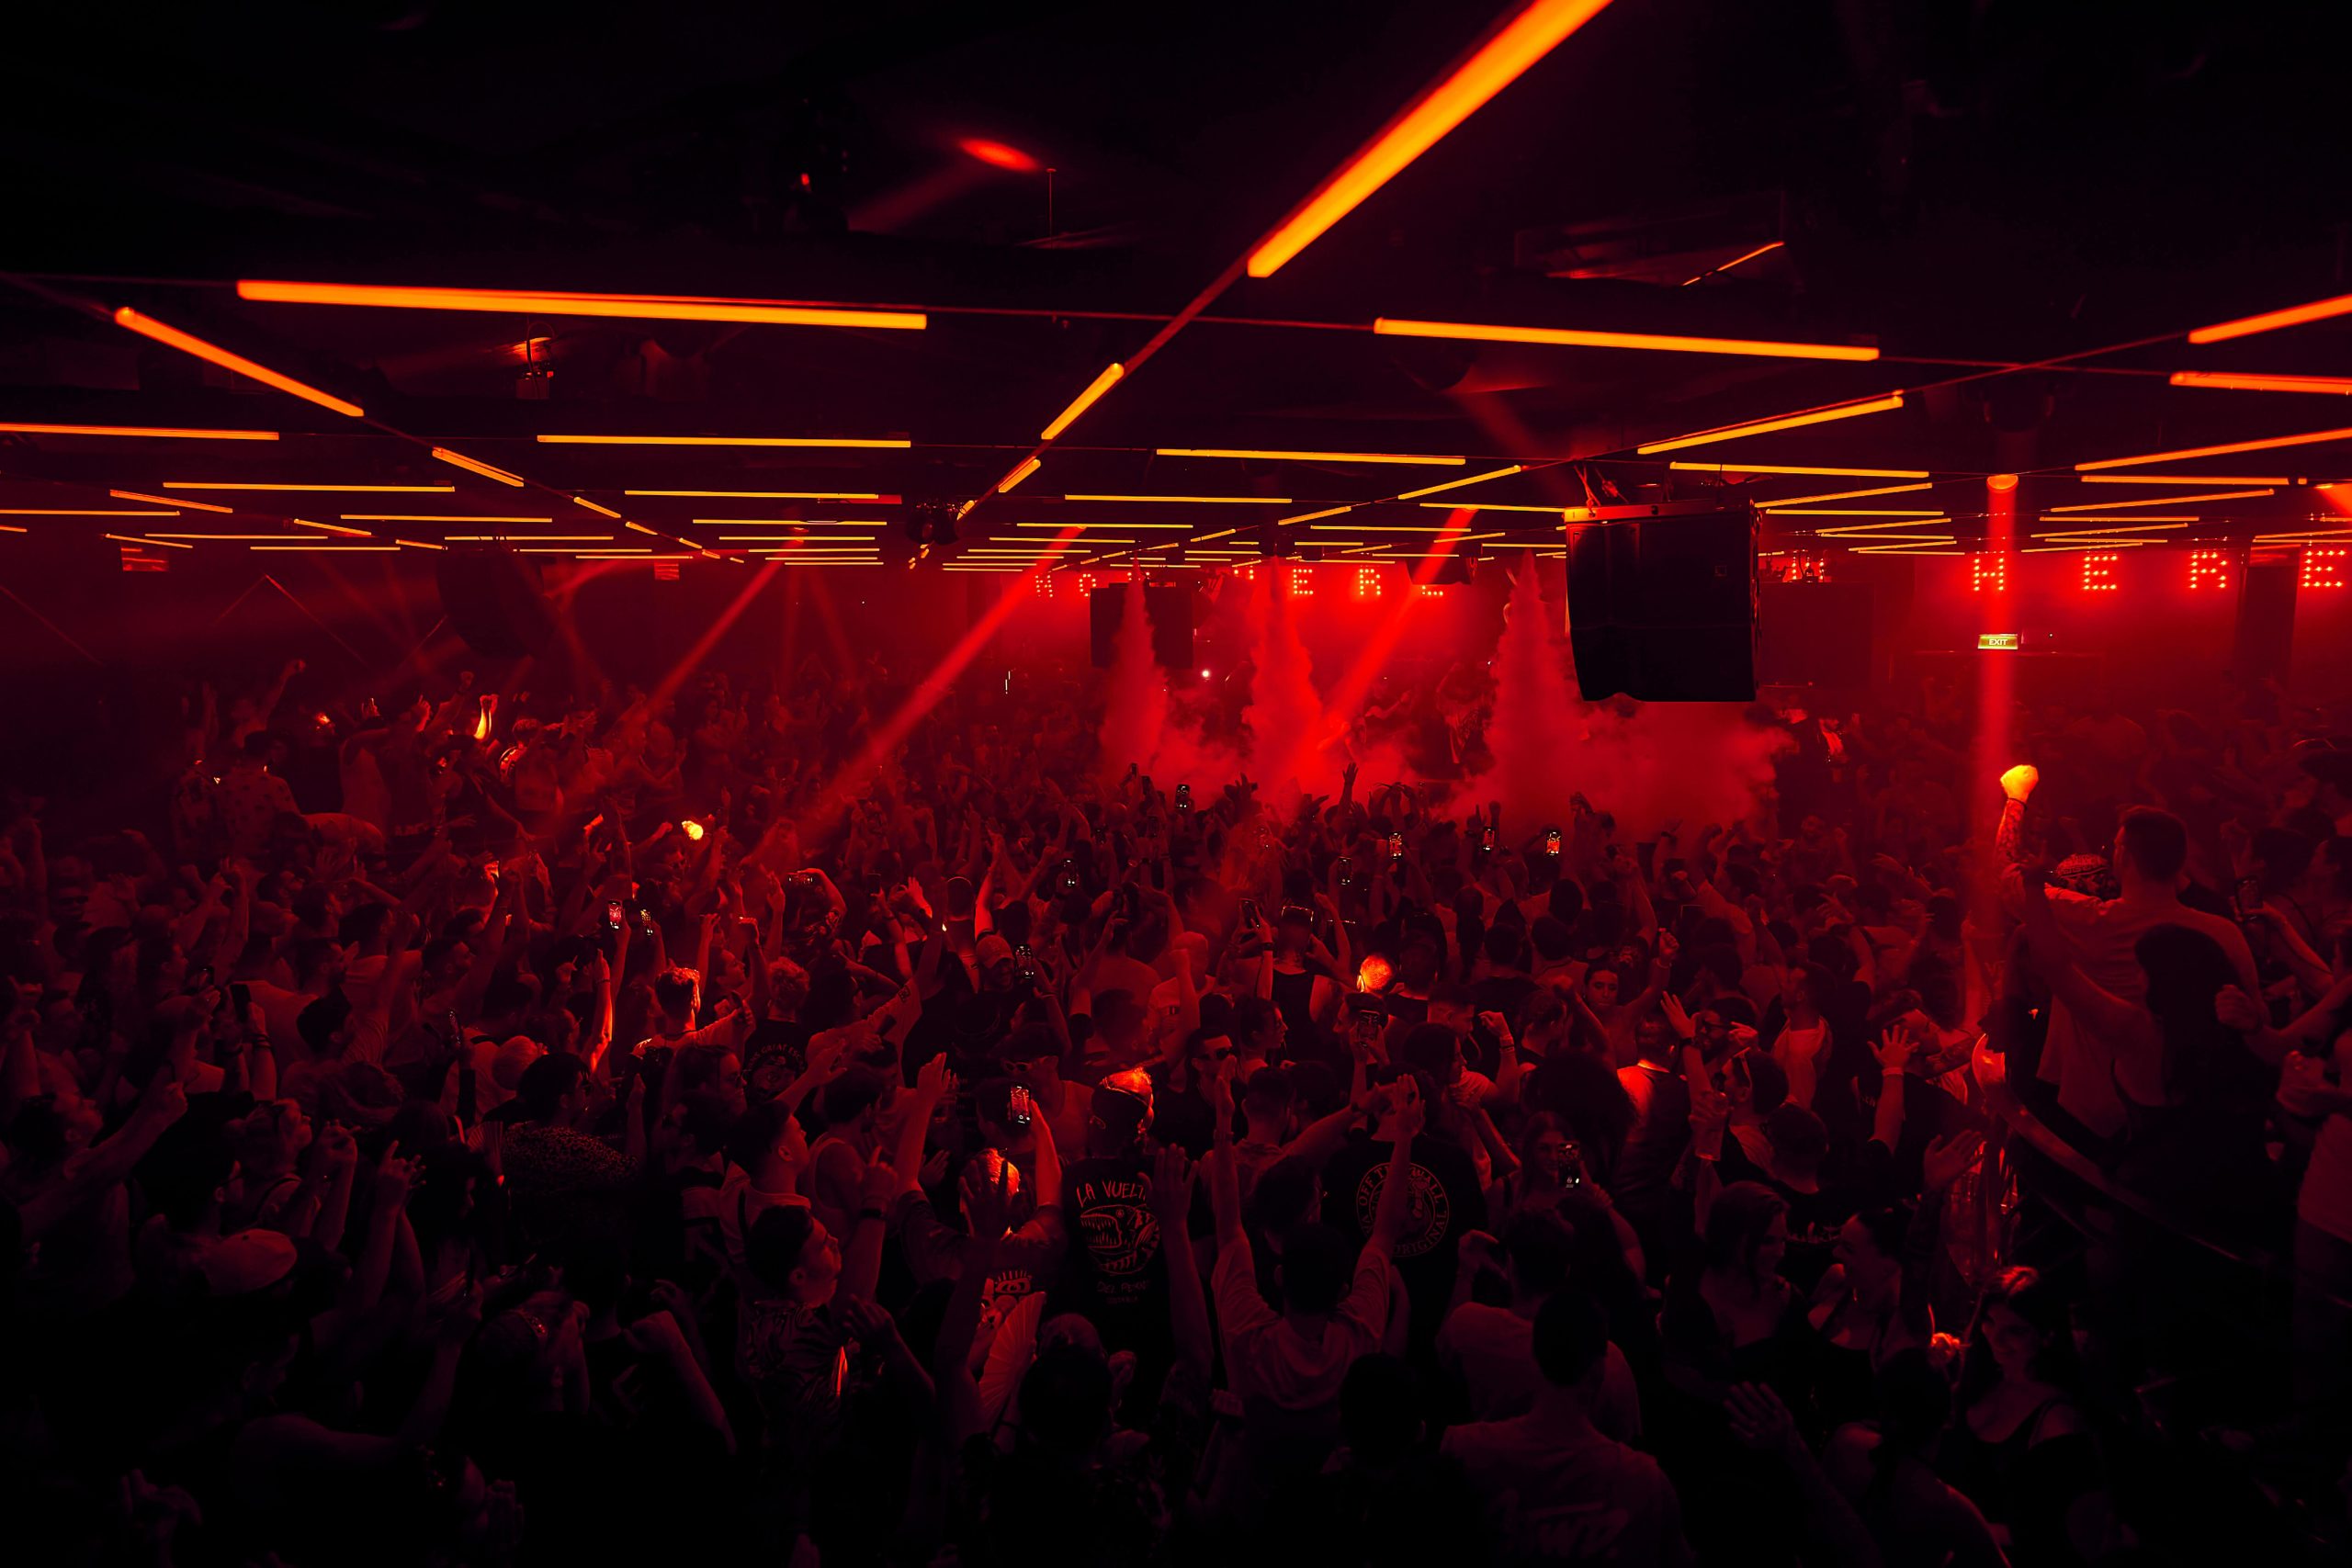 Paco Osuna set to close out NOW HERE Hï Ibiza residency